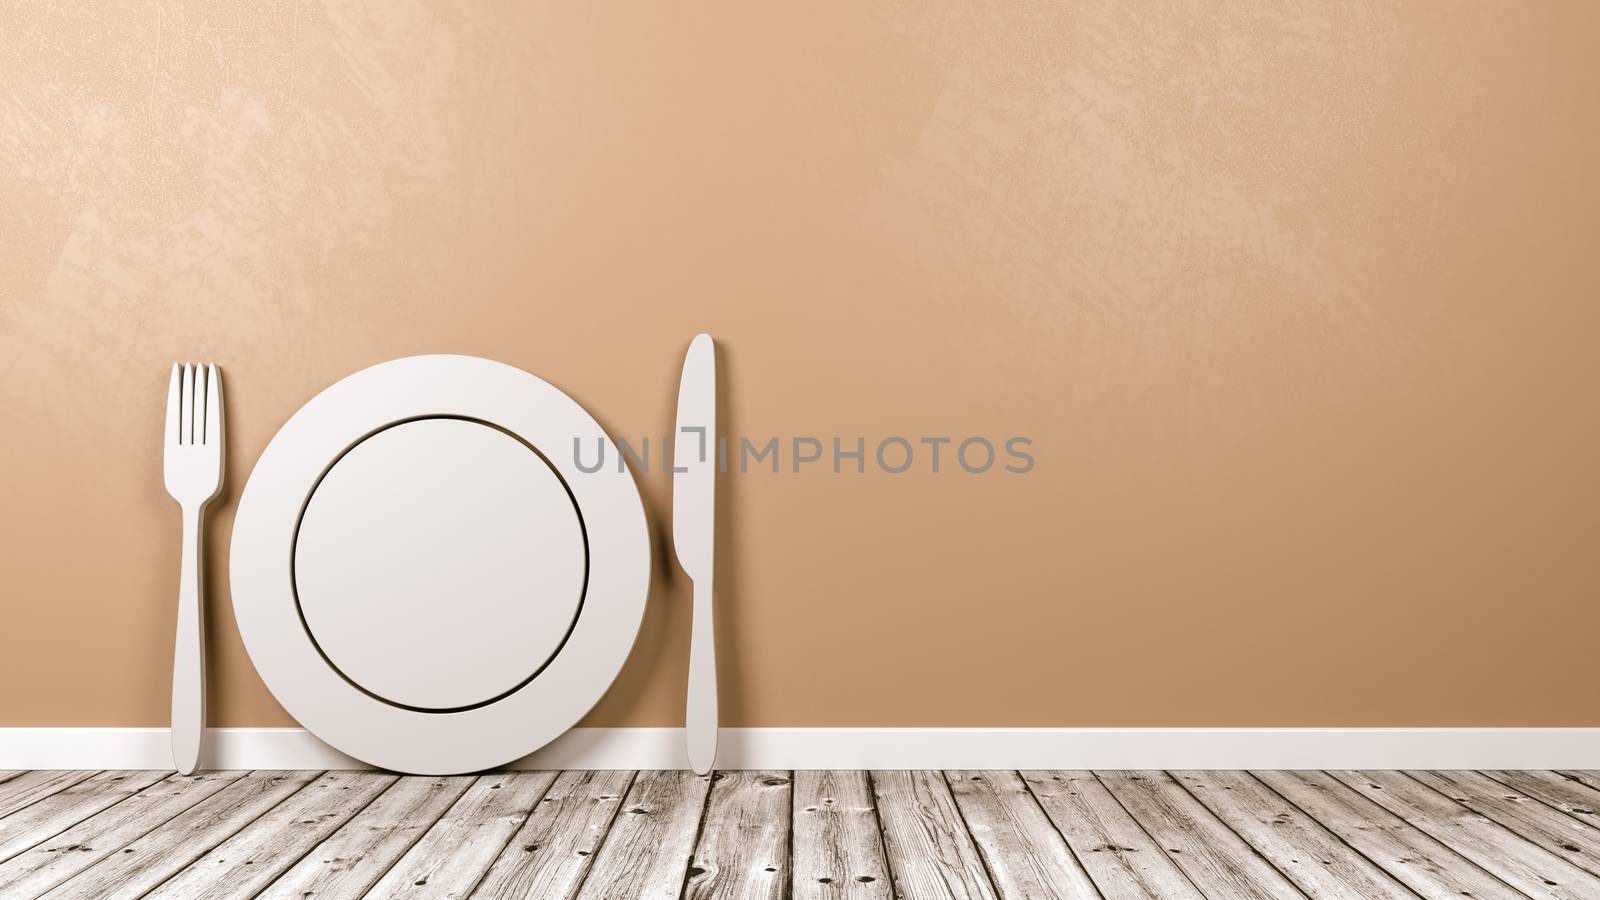 White Kitchenware 3D Shape on Wooden Floor Against Orange Wall with Copy Space 3D Illustration